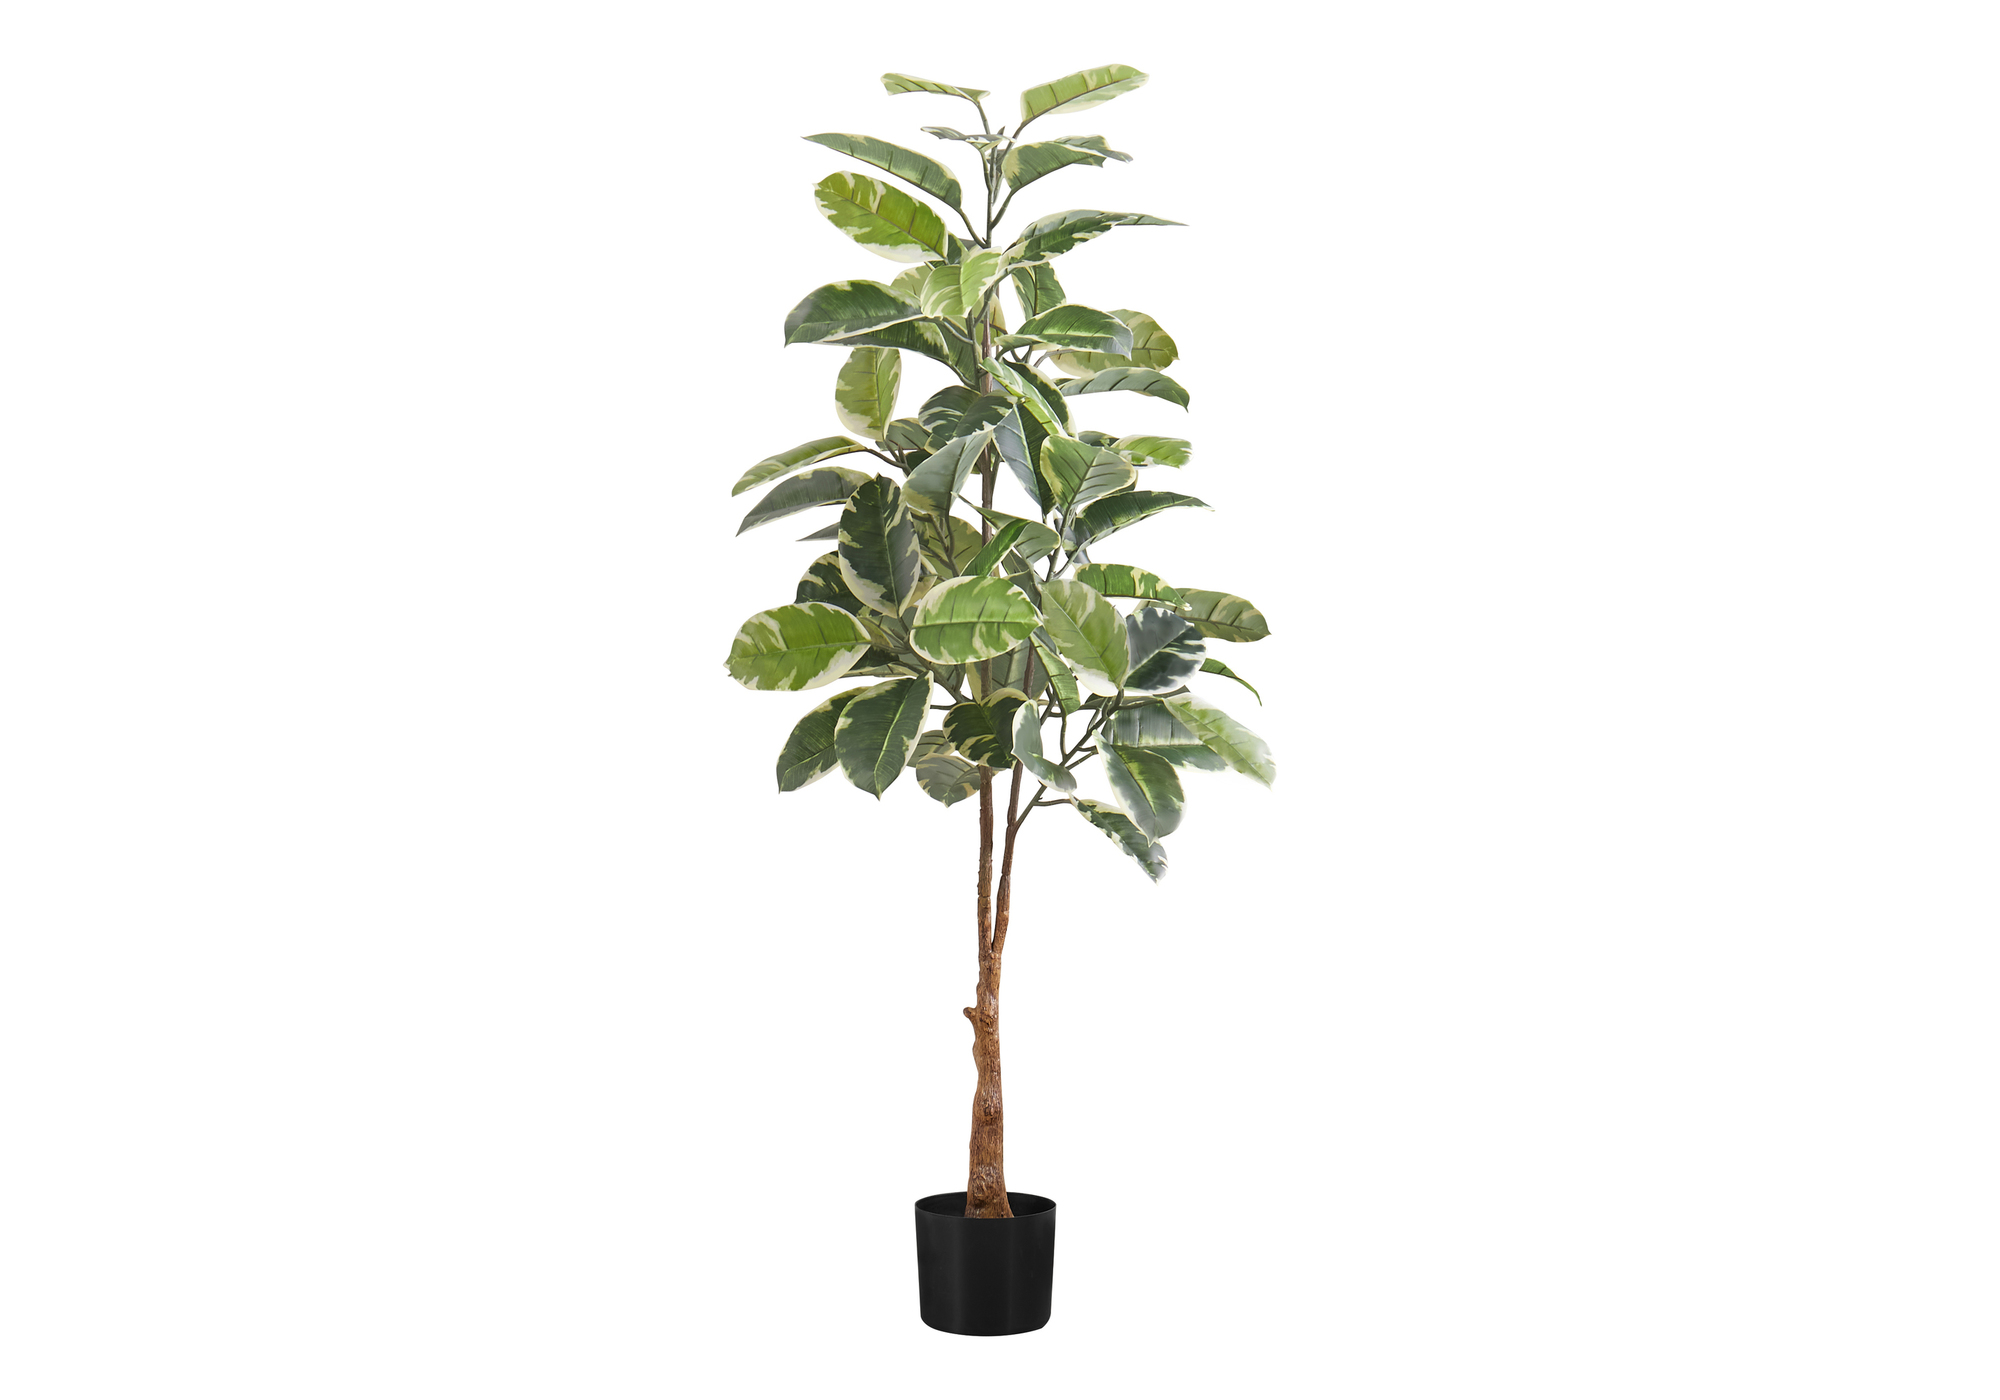 ARTIFICIAL PLANT - 52"H / INDOOR RUBBER TREE IN A 5" POT